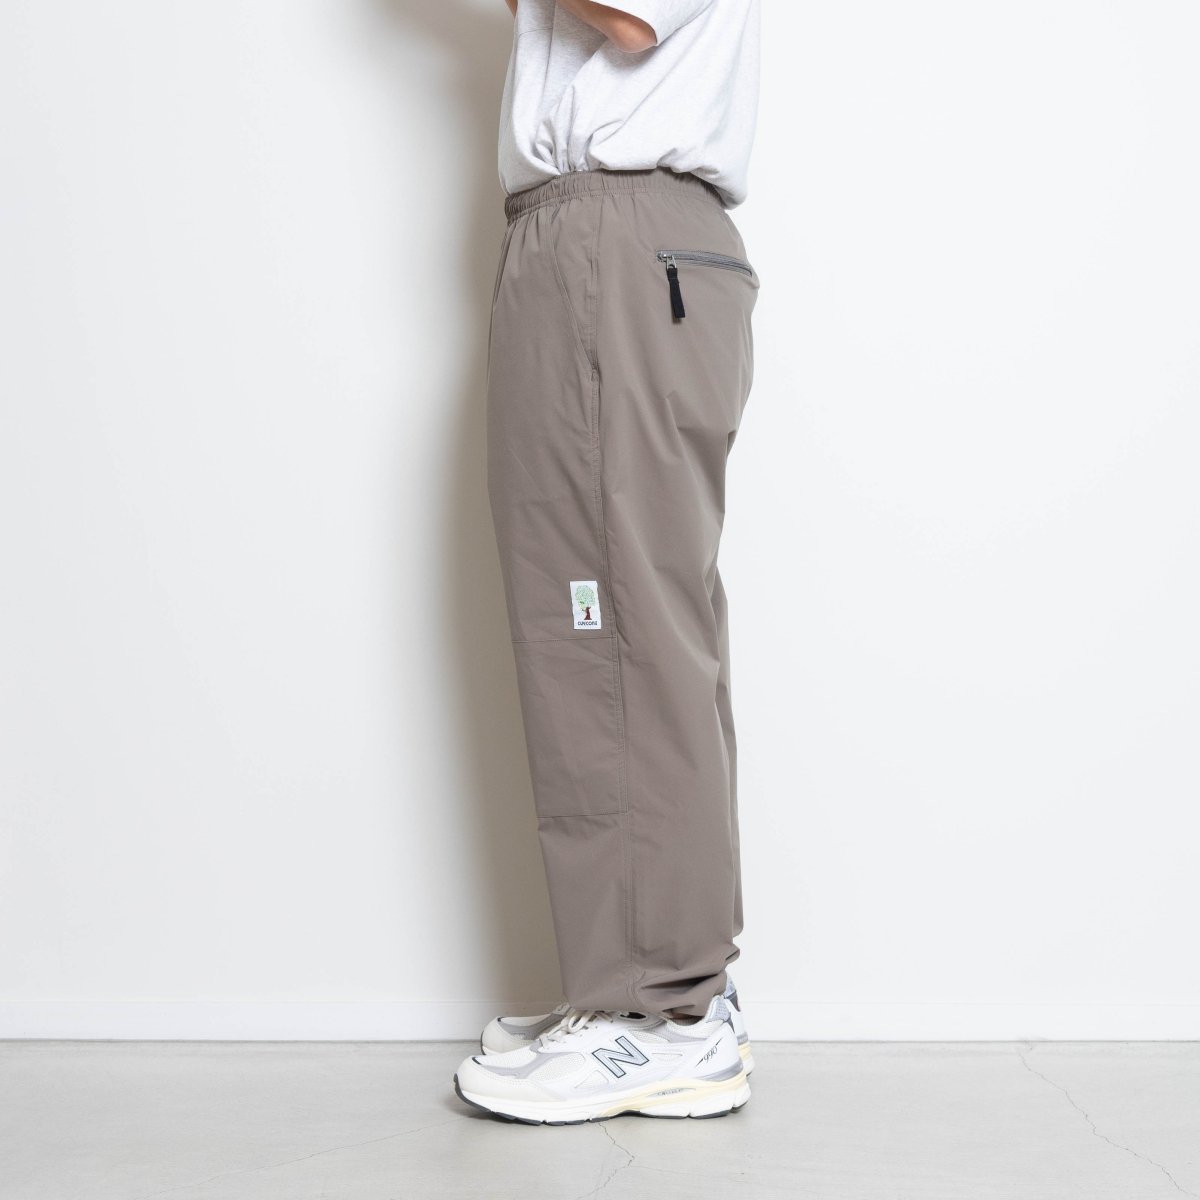 Solotex Track Pants - Brown-Grey - CUP AND CONE WEB STORE